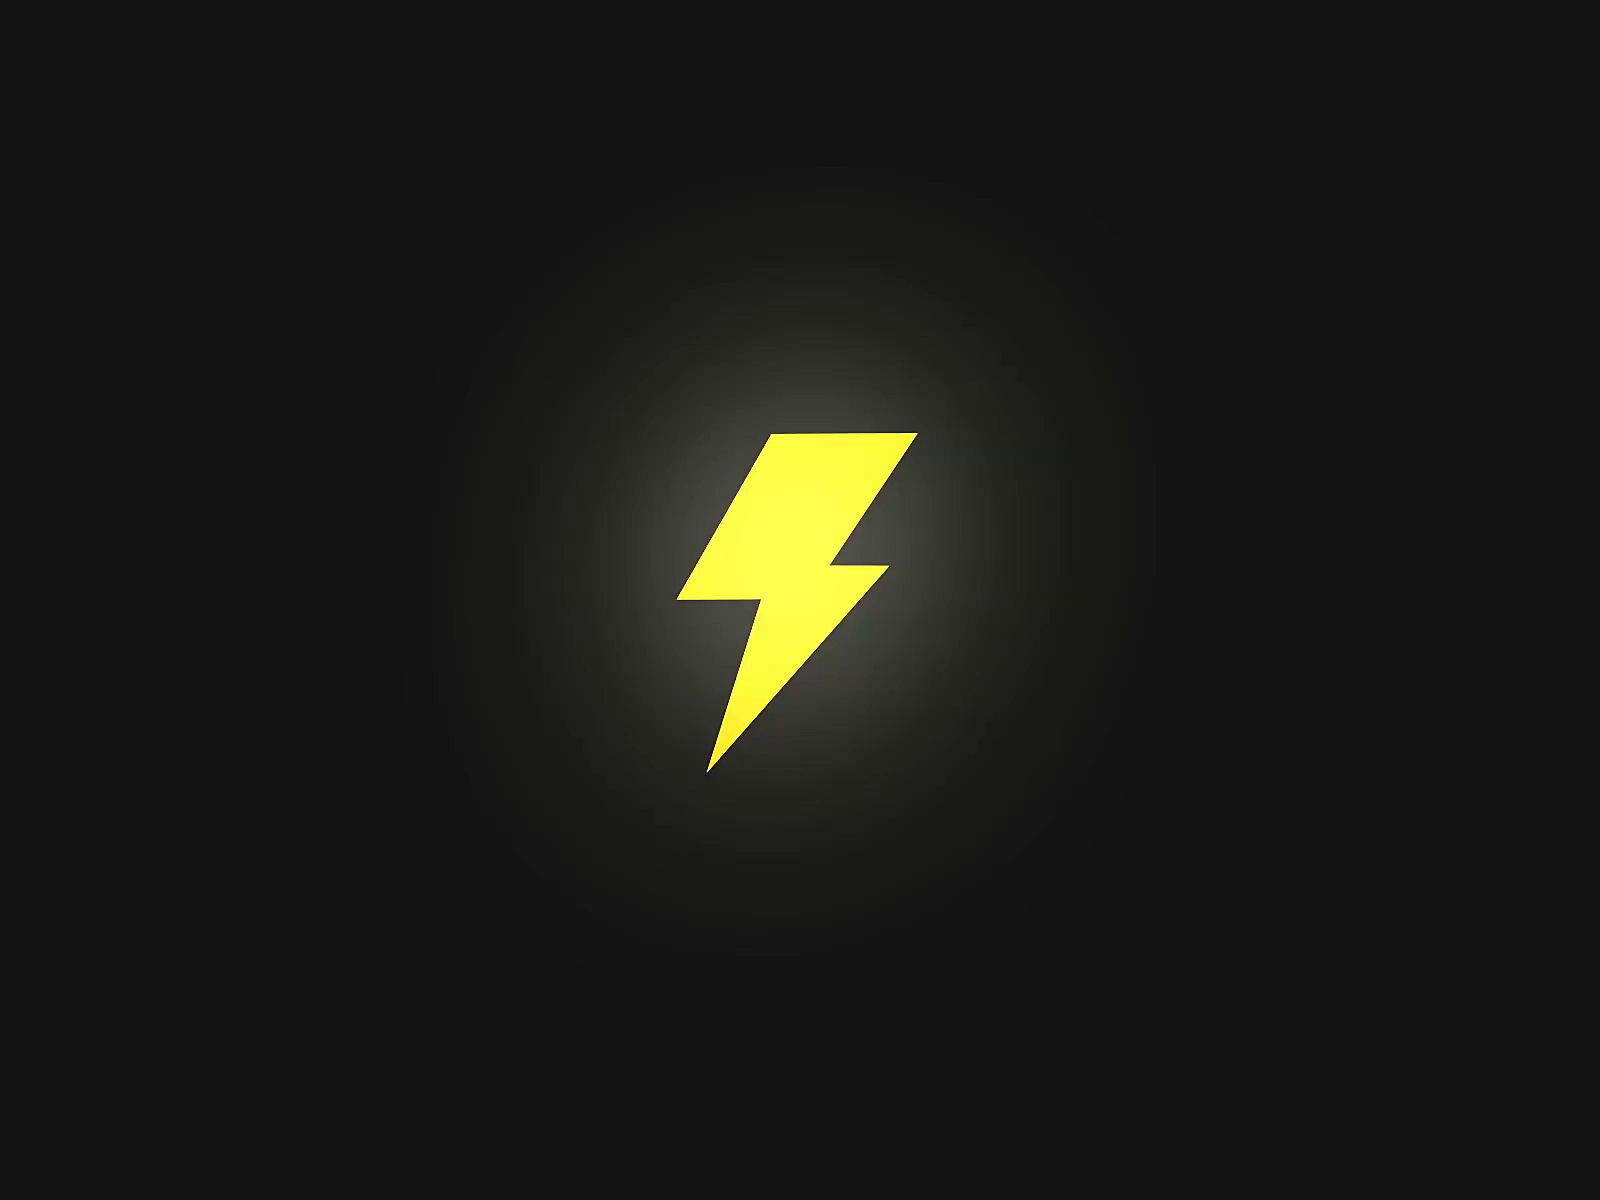 Lightning Loading Animation by Thanh for Salesforce Design on Dribbble